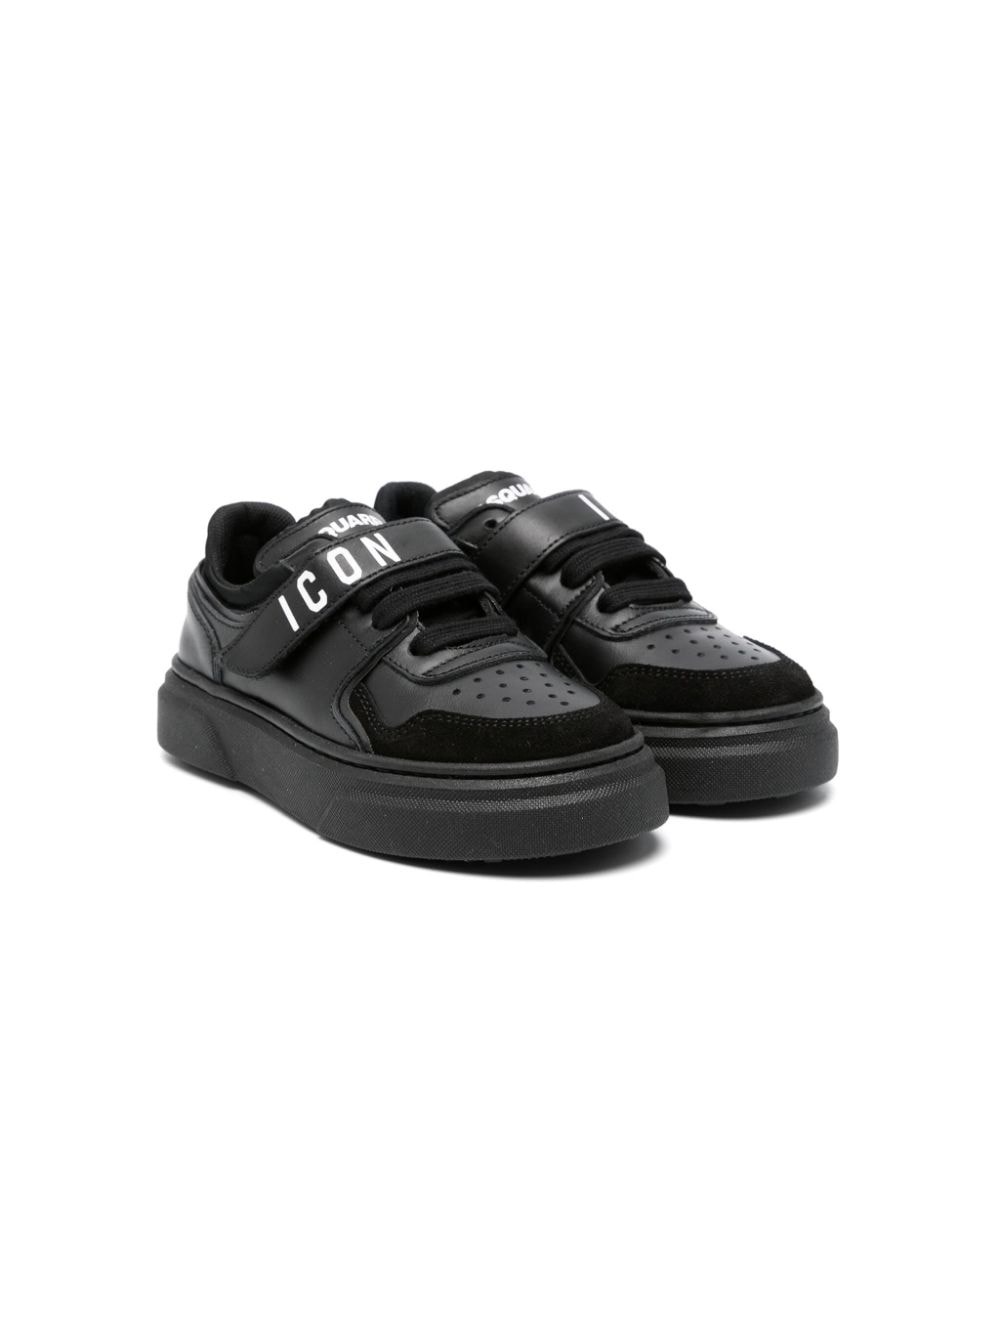 Dsquared2 Kids logo-print panelled leather sneakers - Black von Dsquared2 Kids